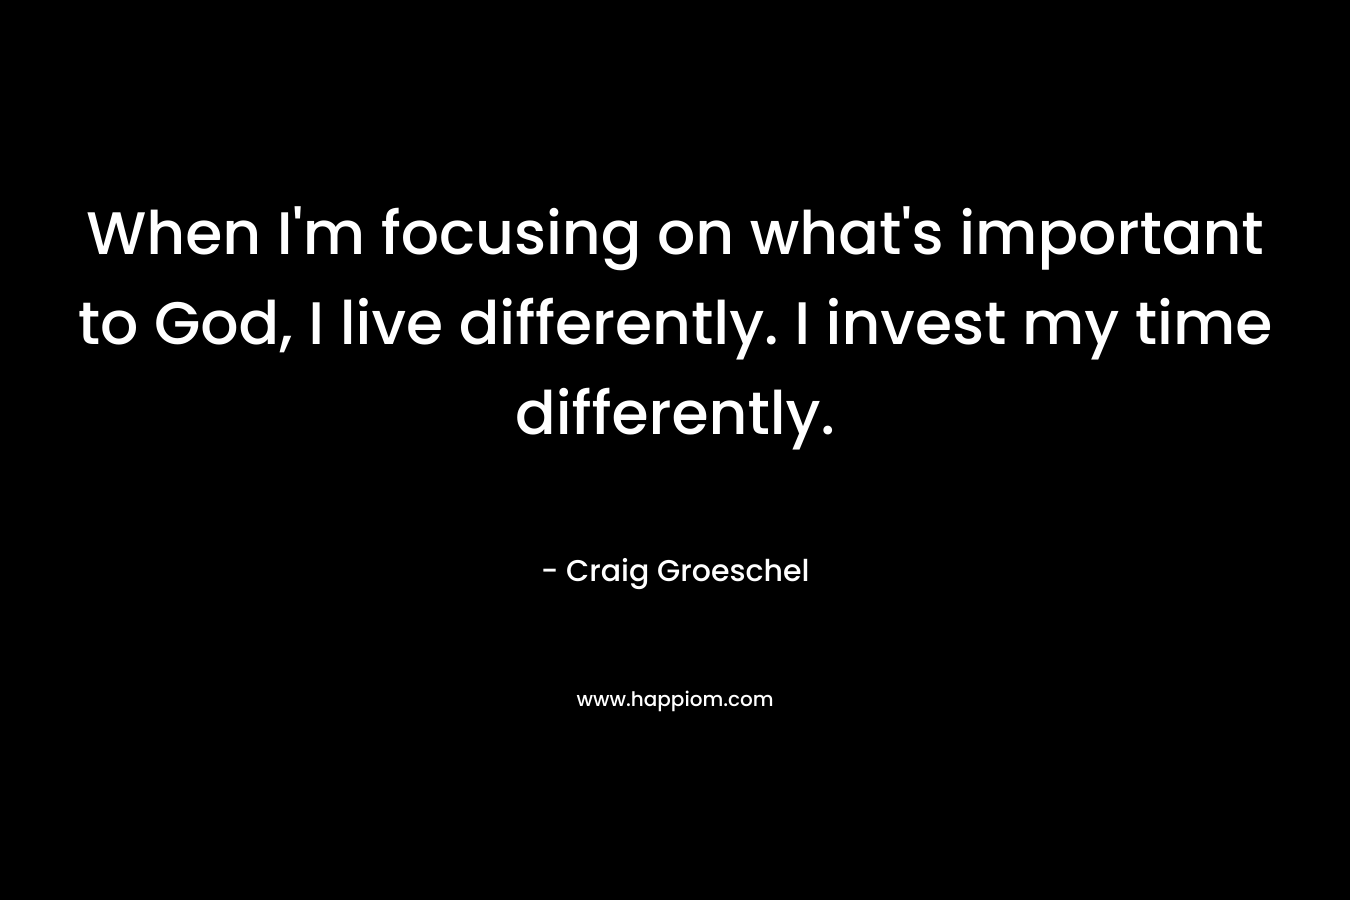 When I'm focusing on what's important to God, I live differently. I invest my time differently.